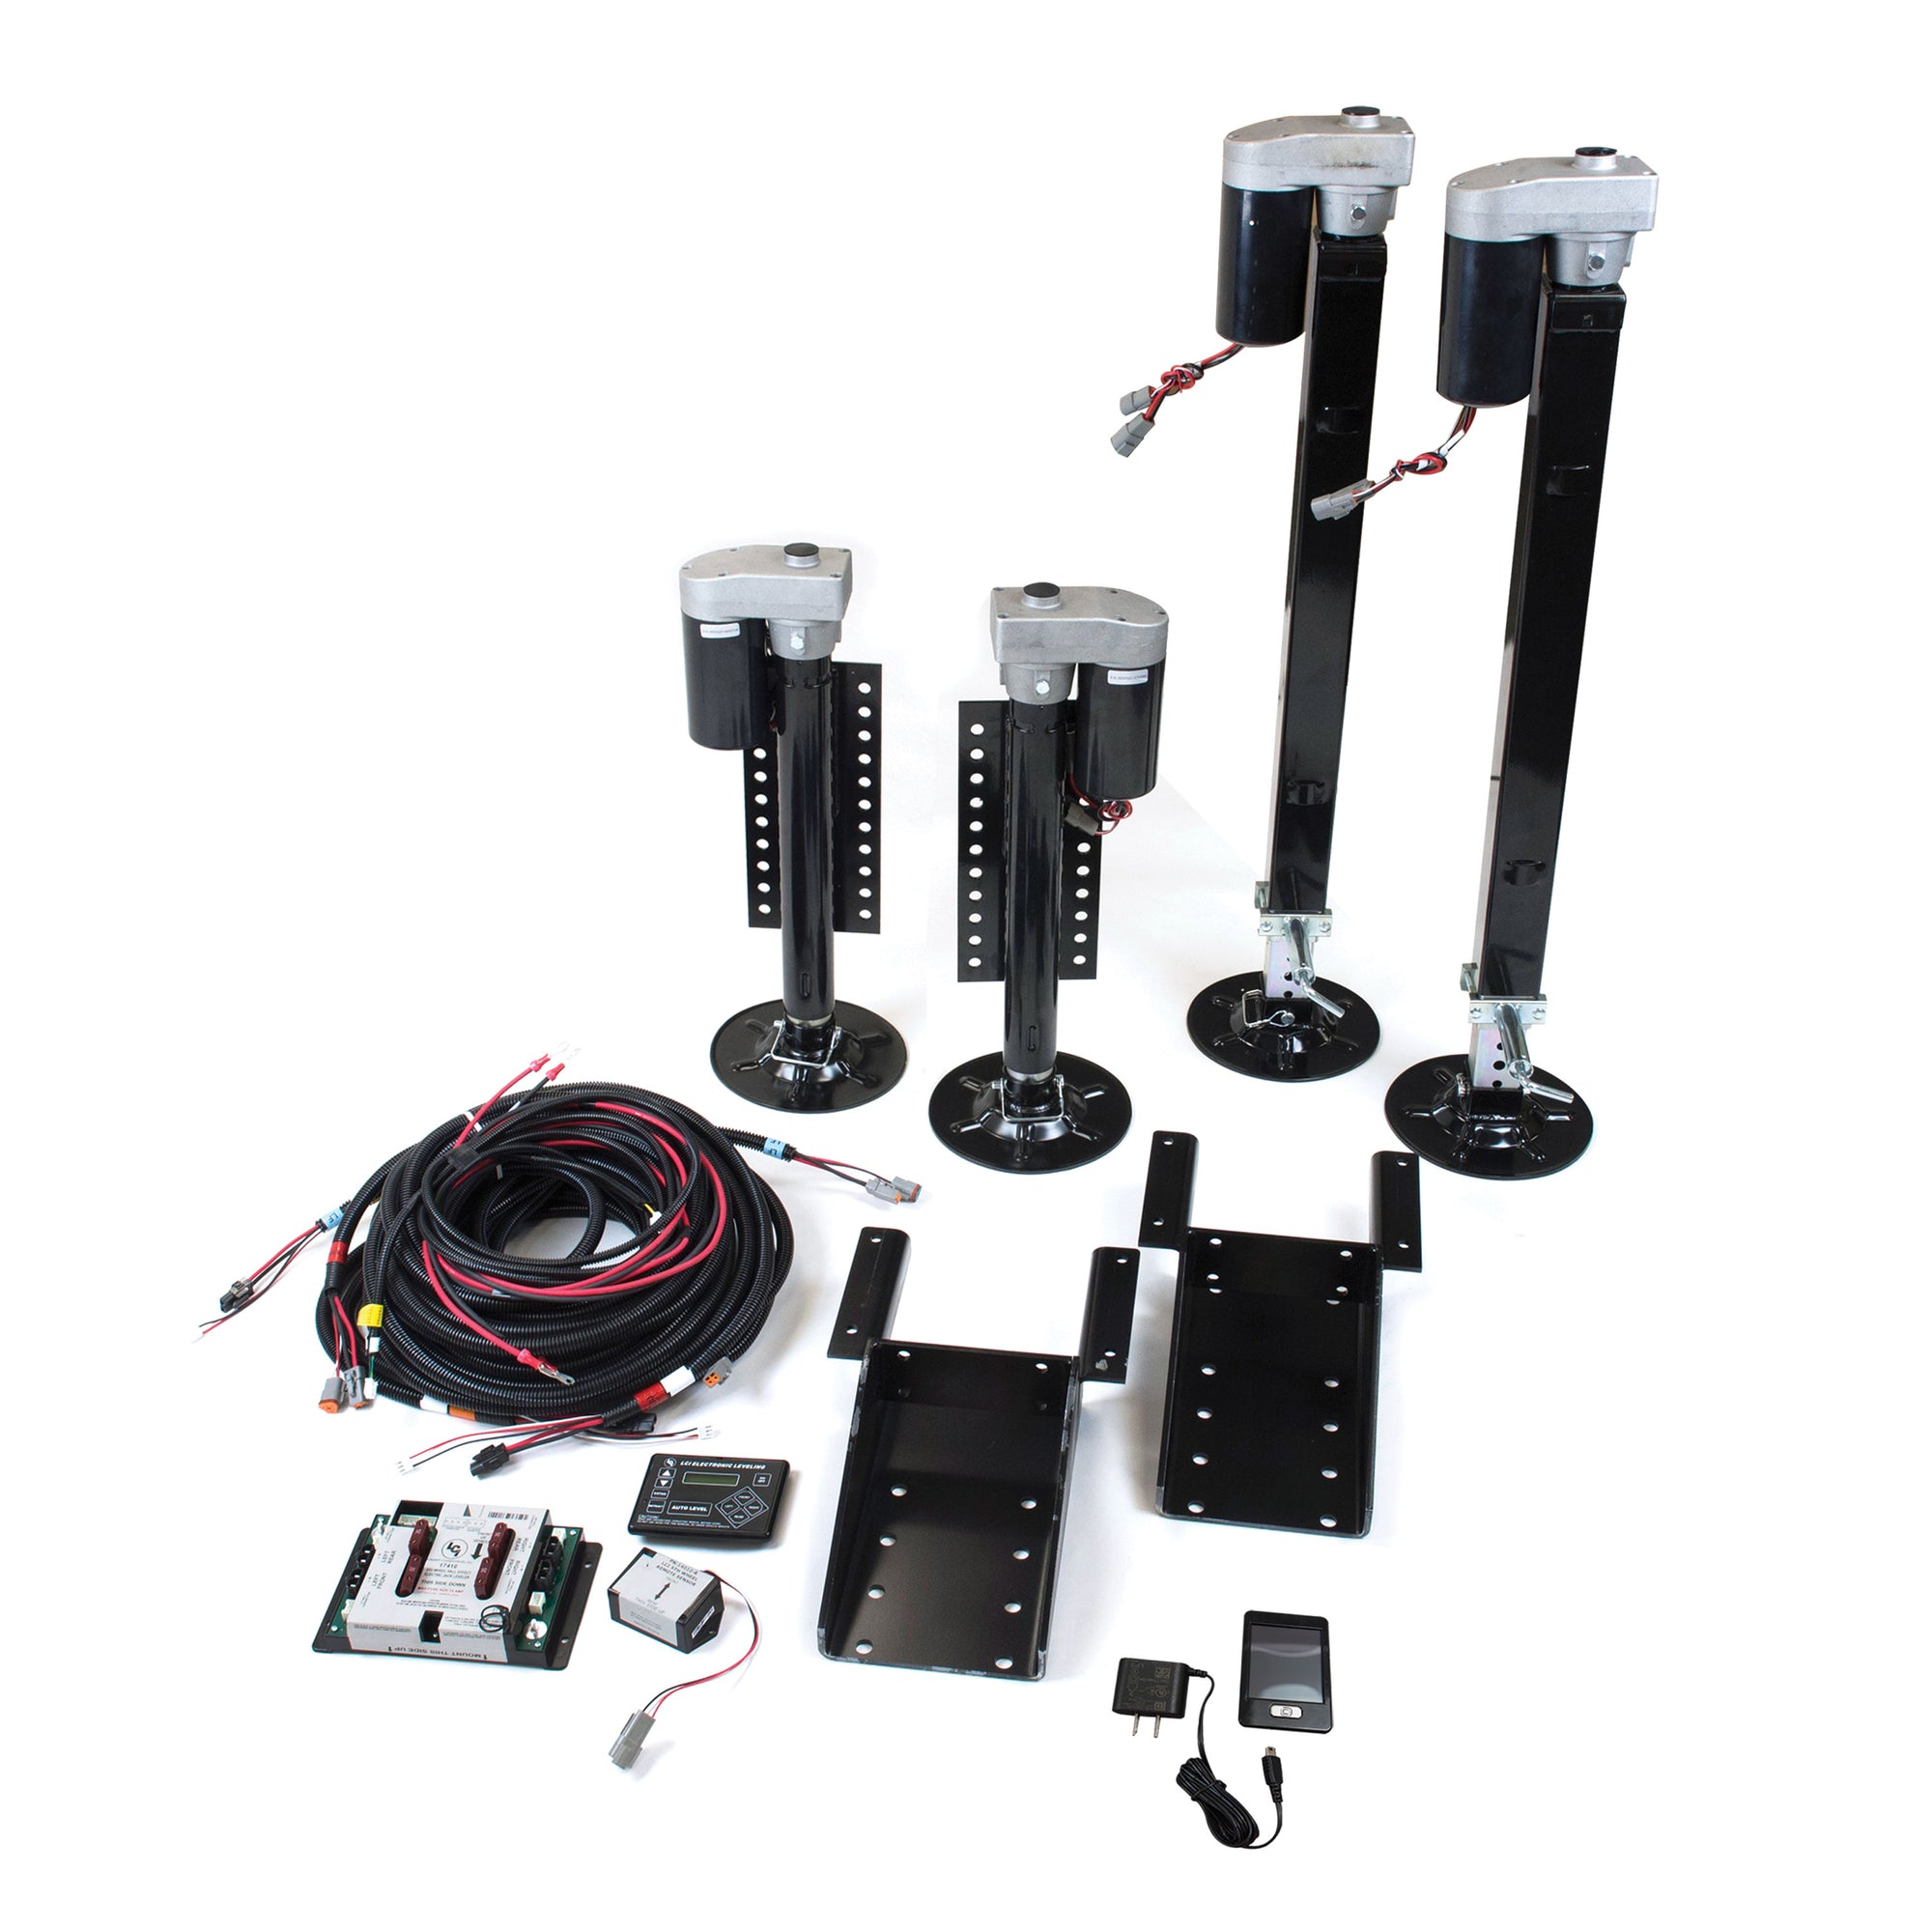 Lippert 672136 Ground Control 88200 12V Wireless Electric RV Leveling System, Travel Trailer